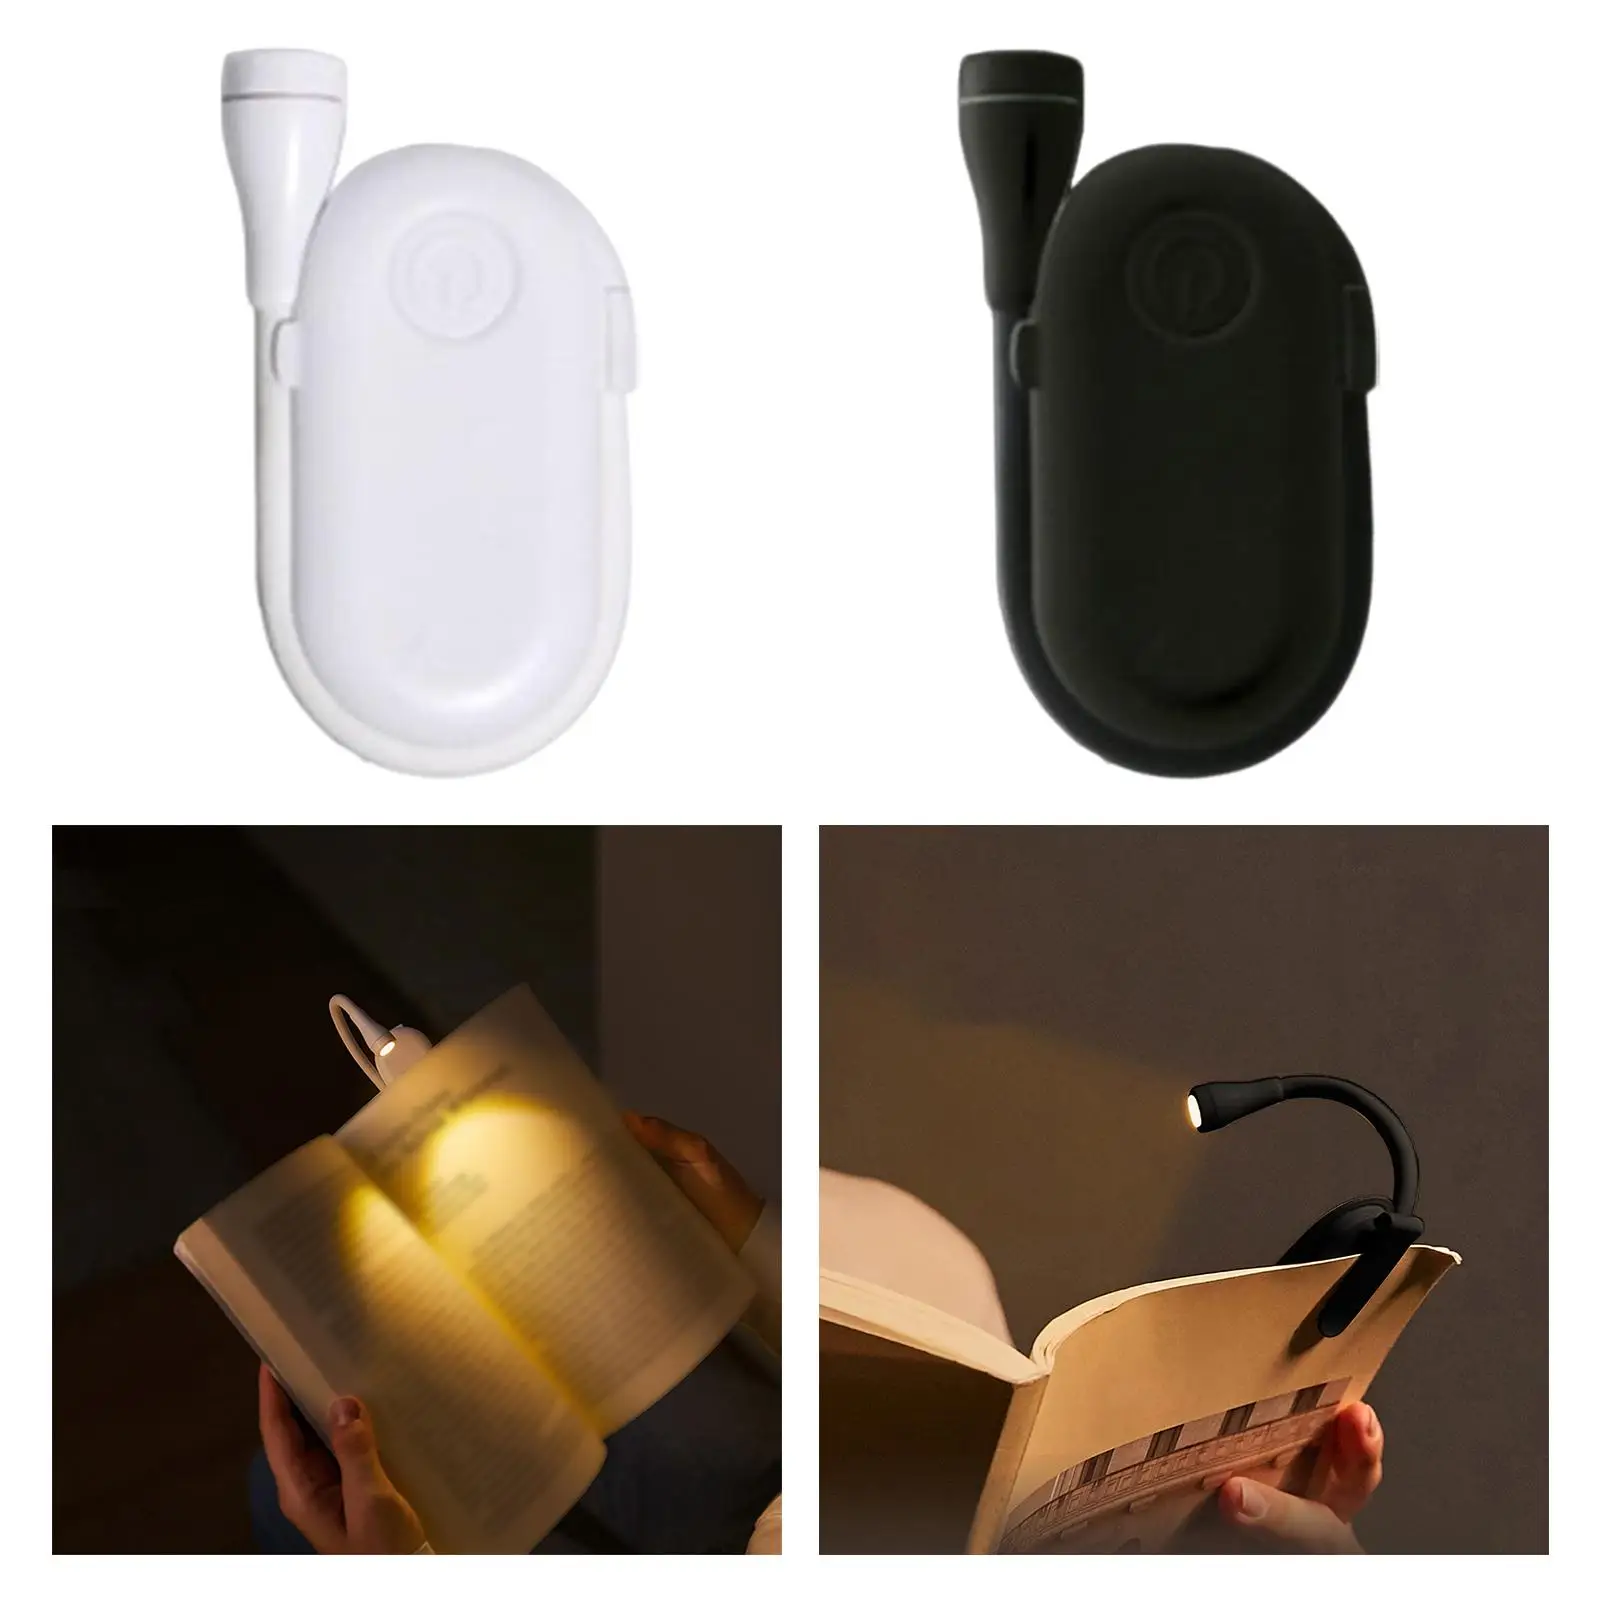 Eye Protection LED Clip On Reading Light Book Light Rechargeable Reading Lamp for Bed Books Music Stand Headboard Working